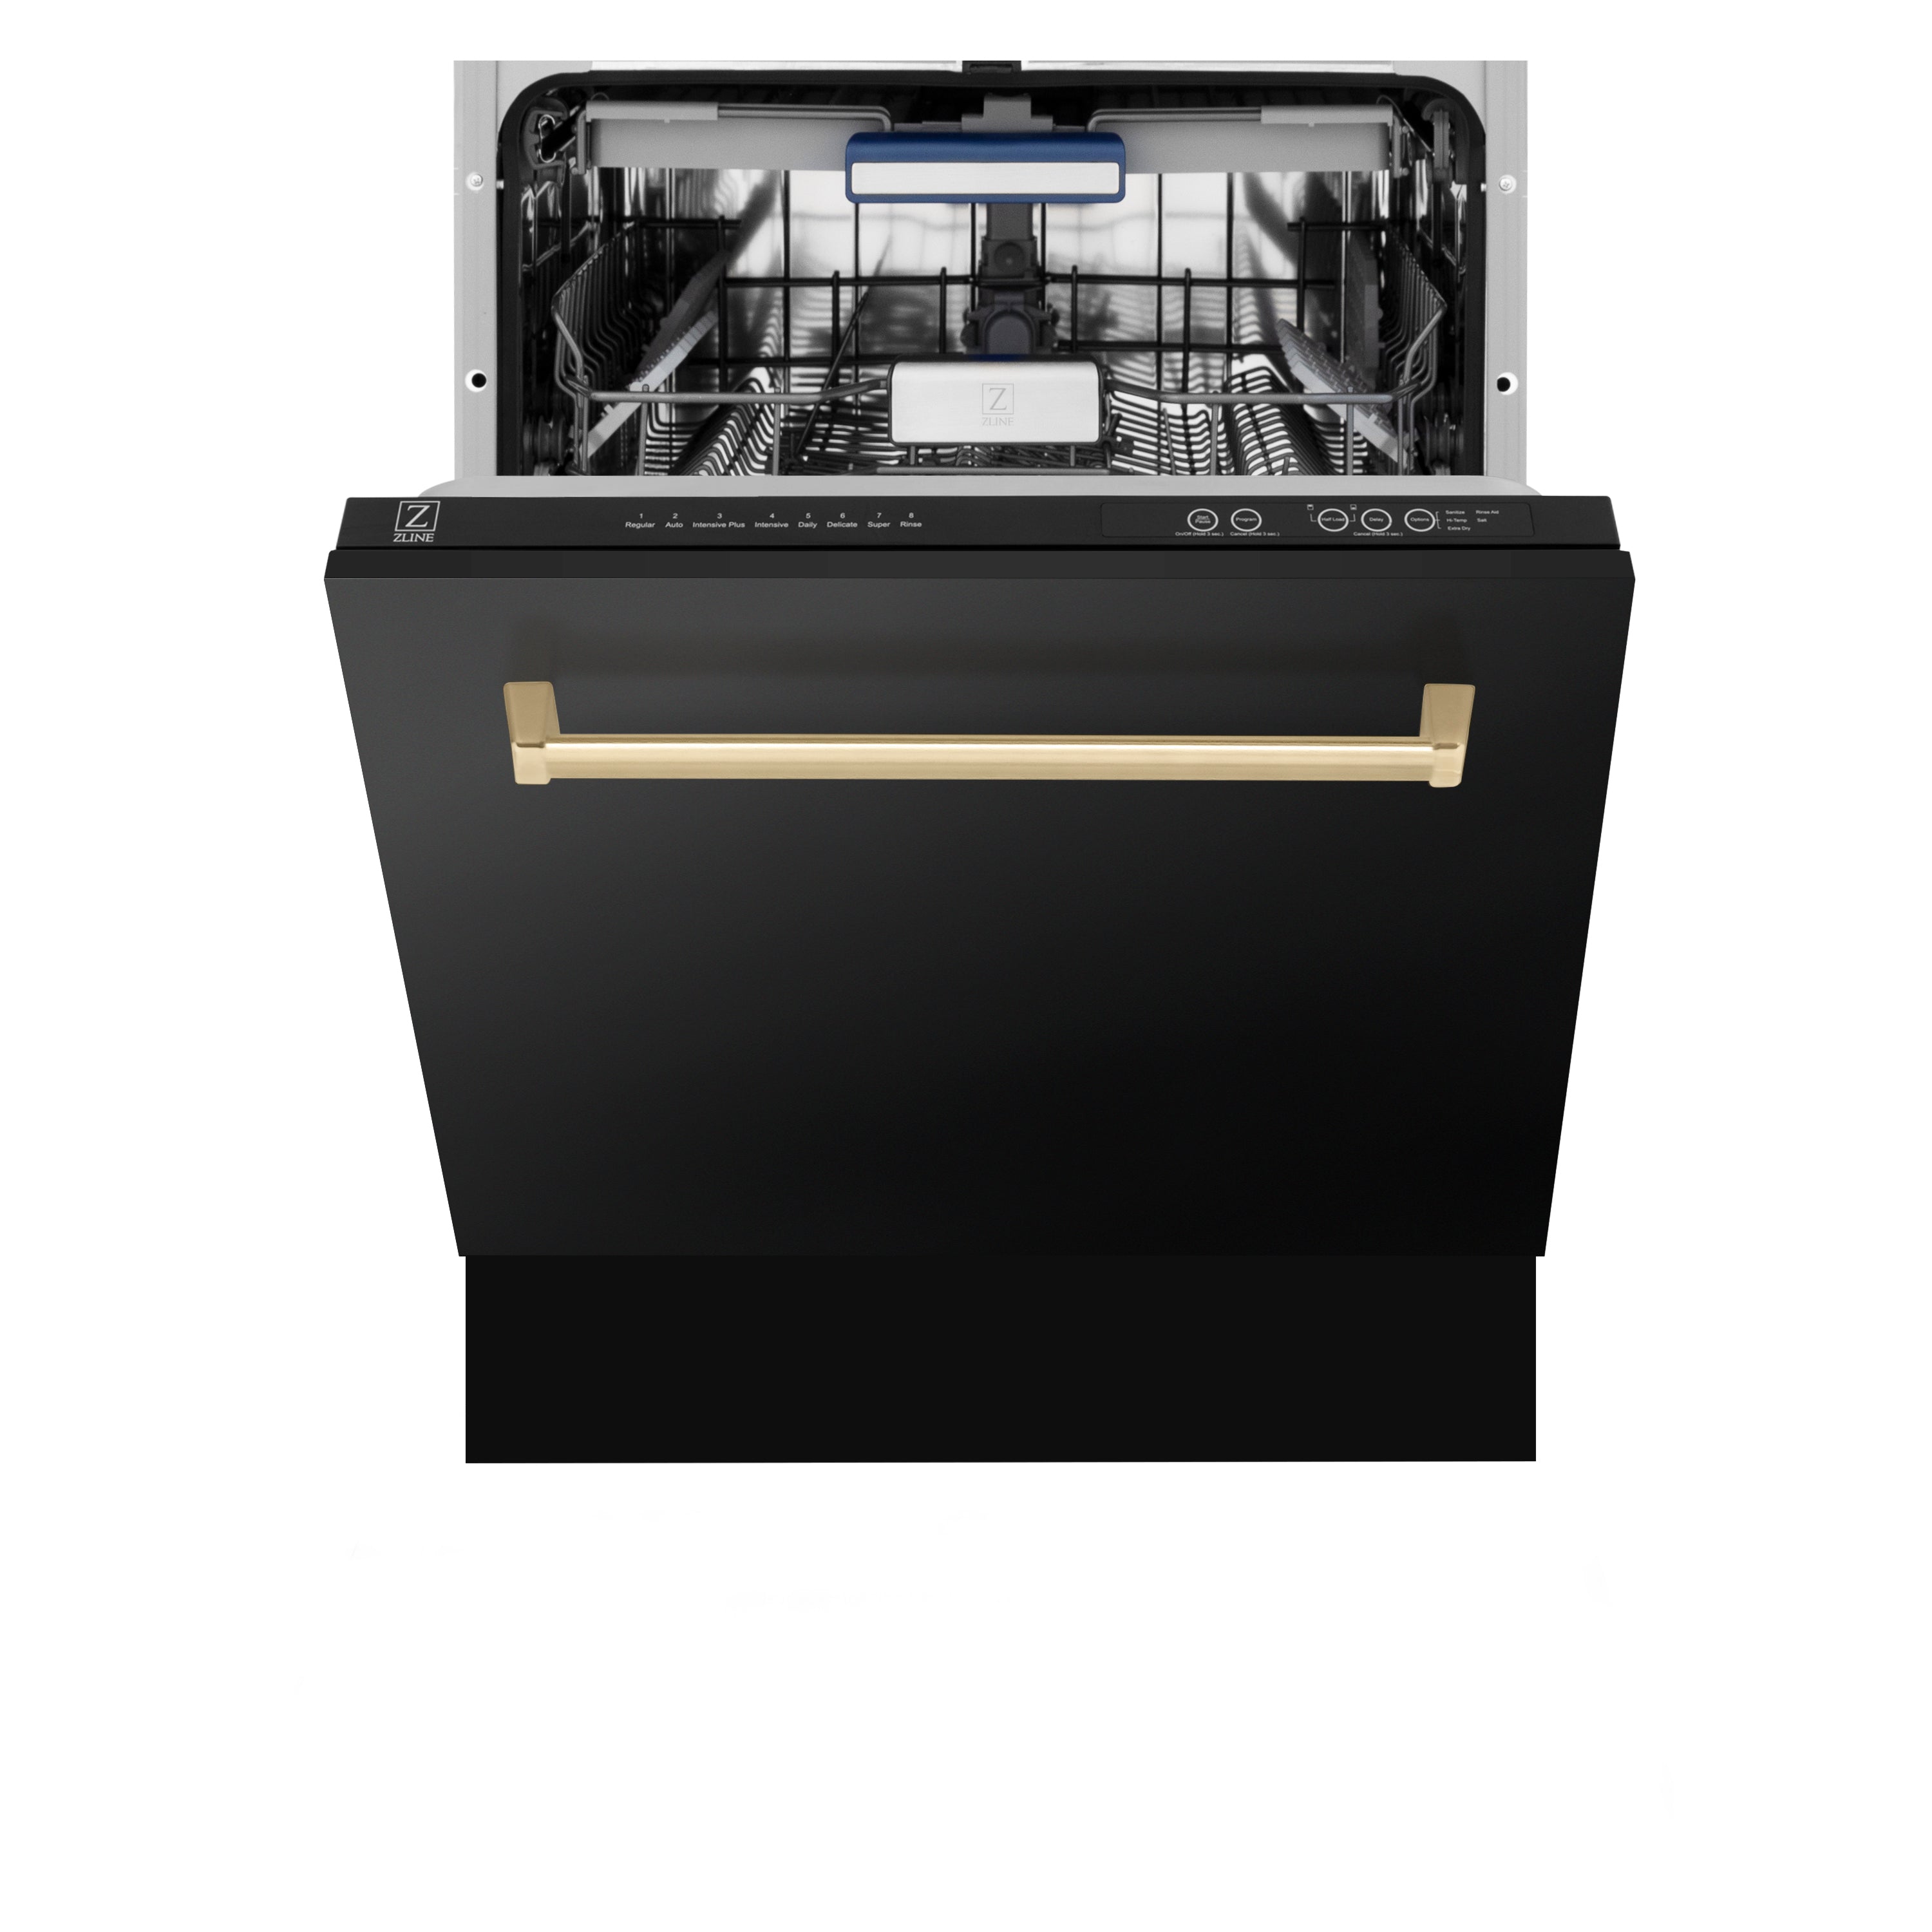 ZLINE Autograph Edition 24 in. 3rd Rack Top Control Tall Tub Dishwasher in Black Stainless Steel with Champagne Bronze Accent Handle, 51dBa (DWVZ-BS-24-CB)